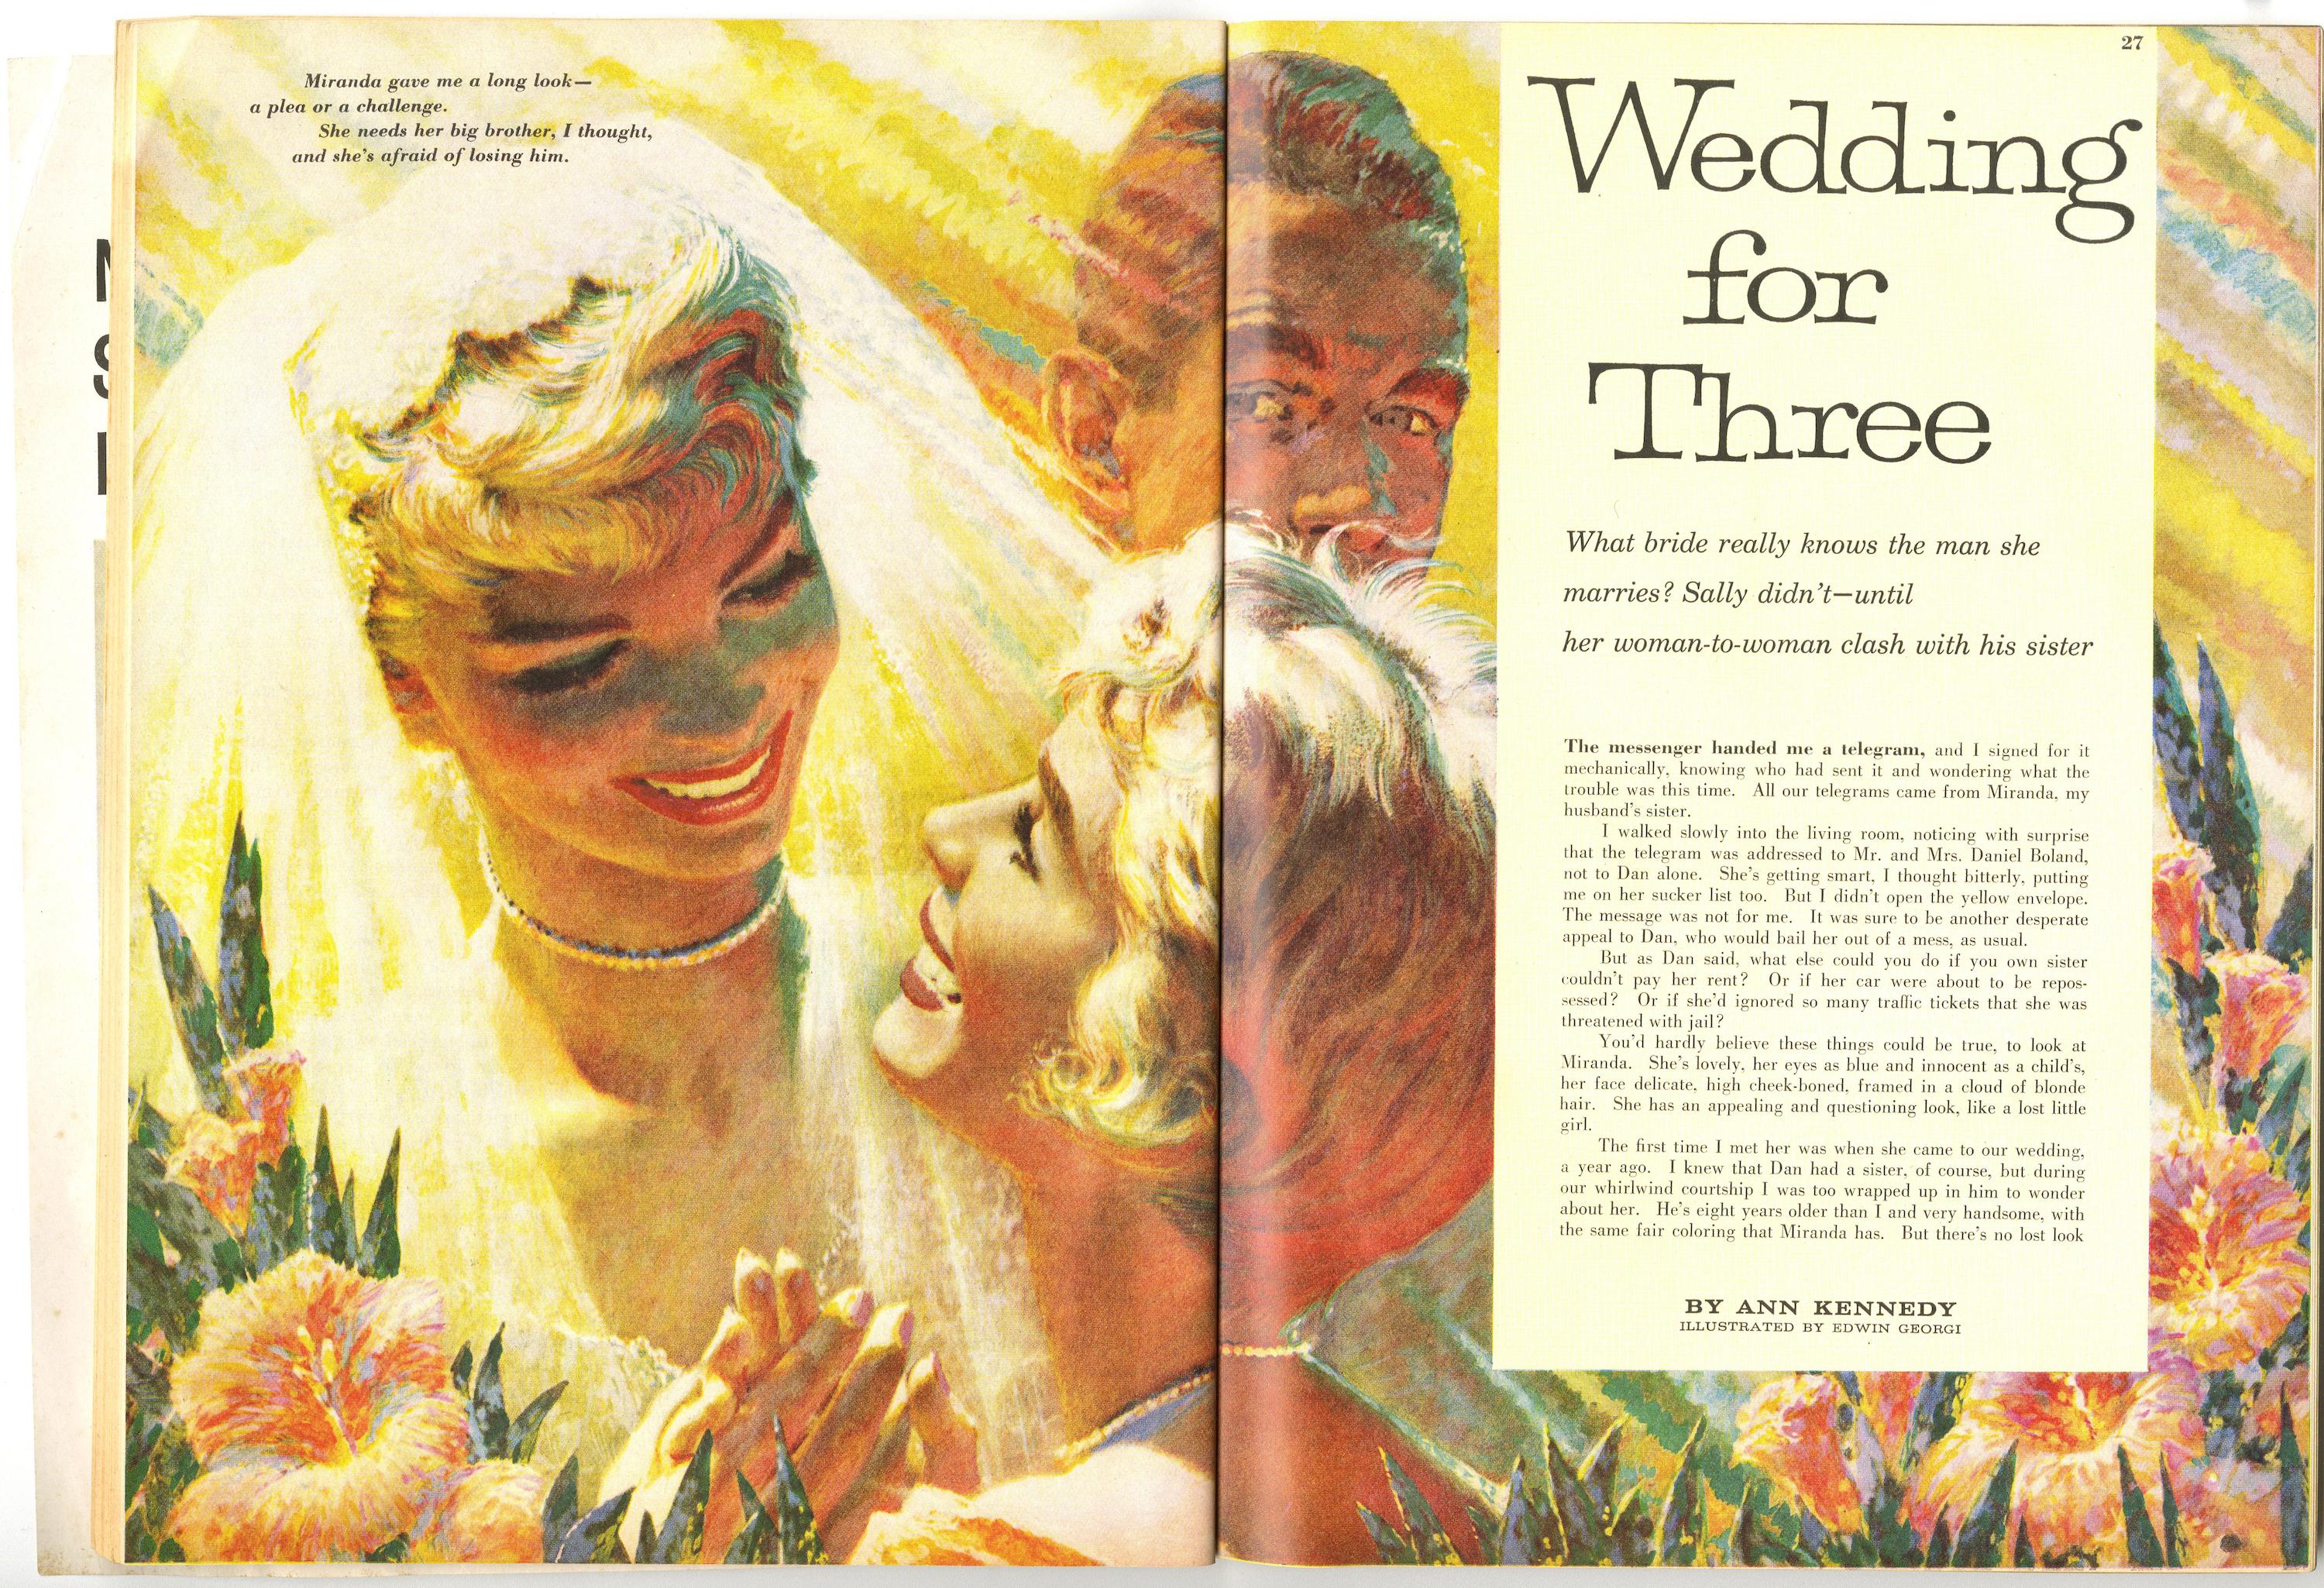 A large, luminous, and otherworldly gouache illustration created for Redbook Magazine, verso is dated January 1958, but this appeared illustrating the story “Wedding for Three” by Ann Kennedy in the January 1959 issue.  A dazzling work by one of our